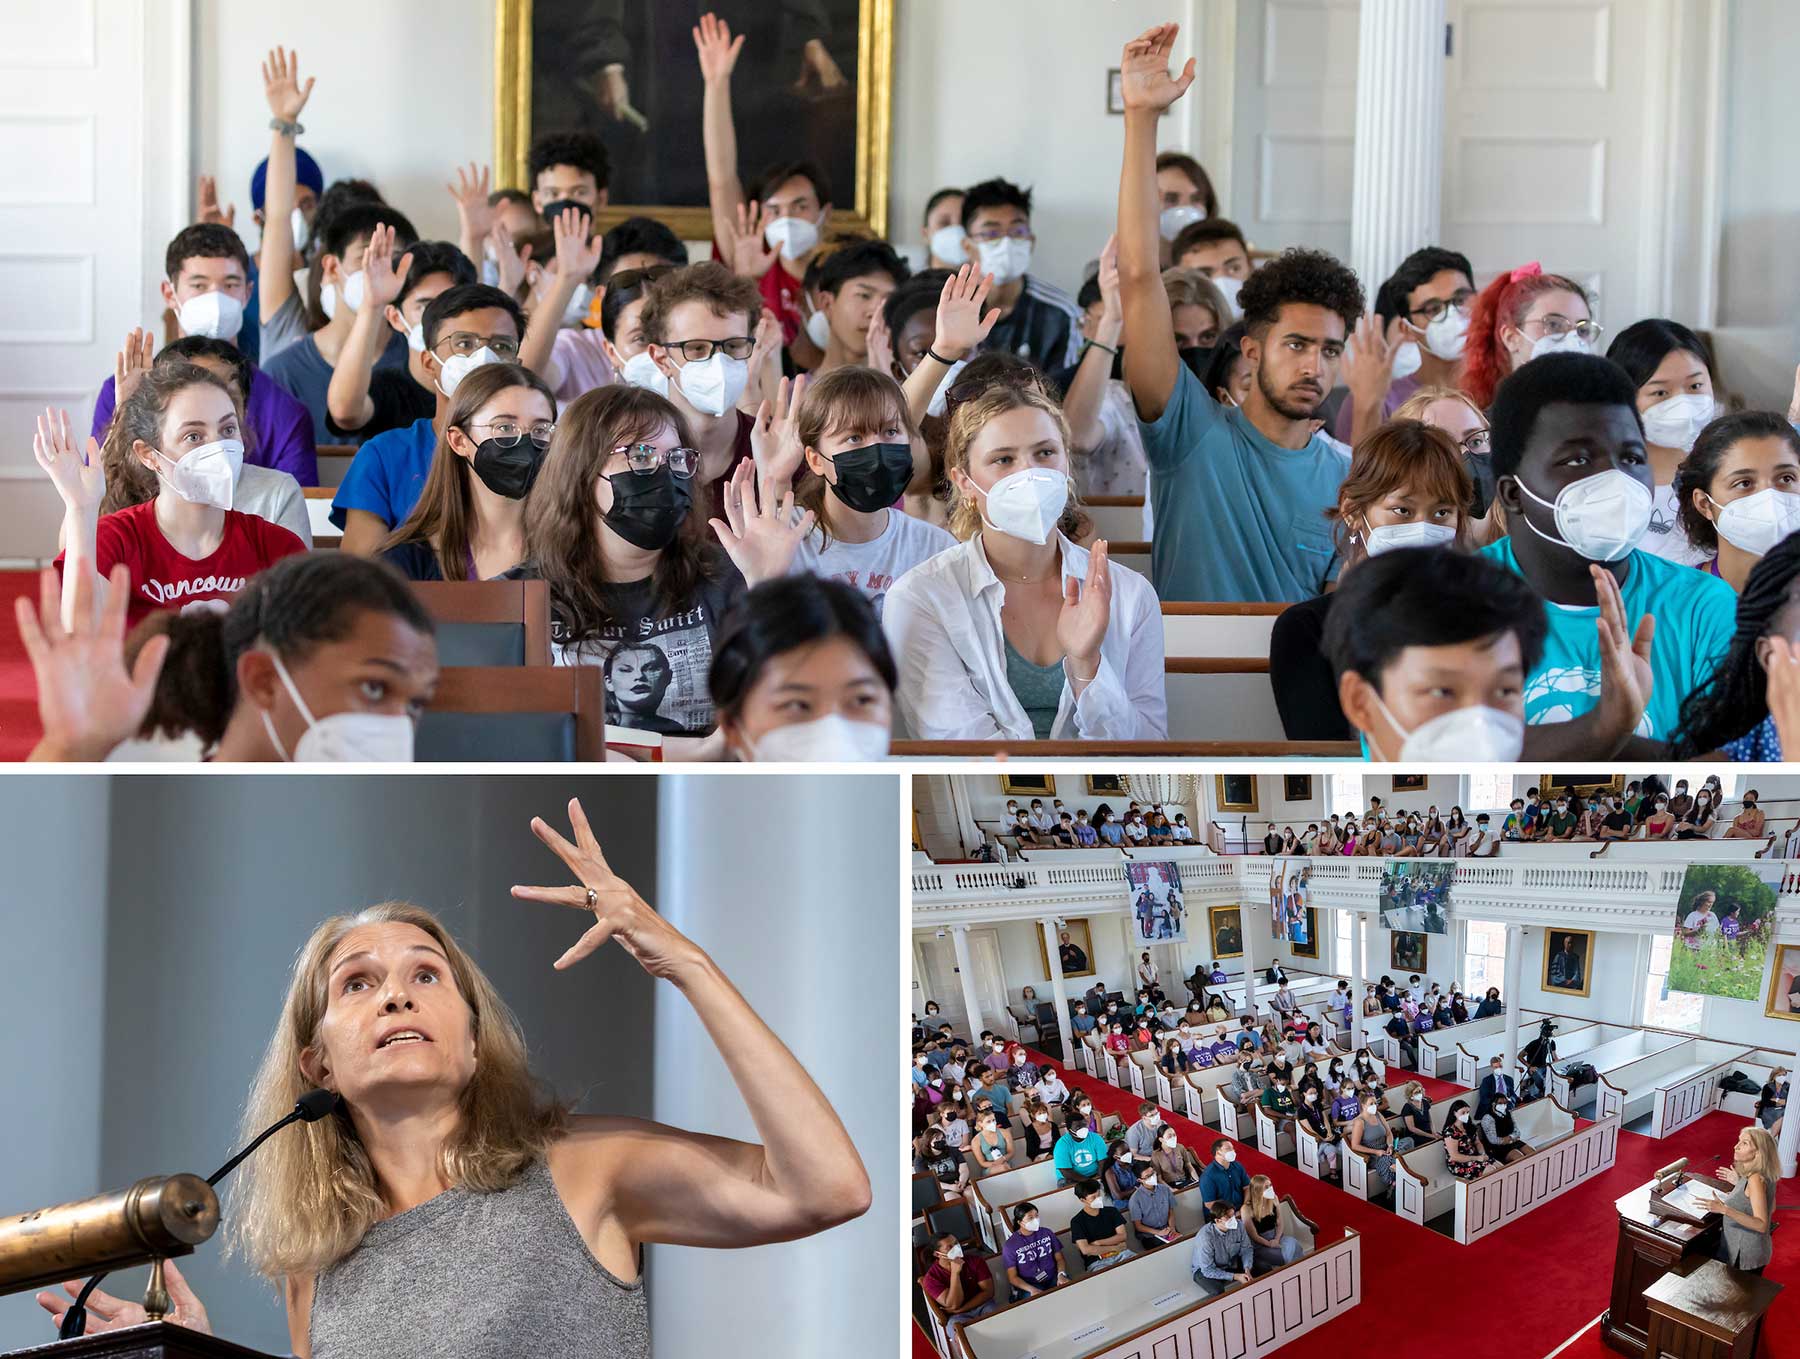 Students attend a lecture in Johnson Chapel; Professor Sanderson addresses them from the stage.